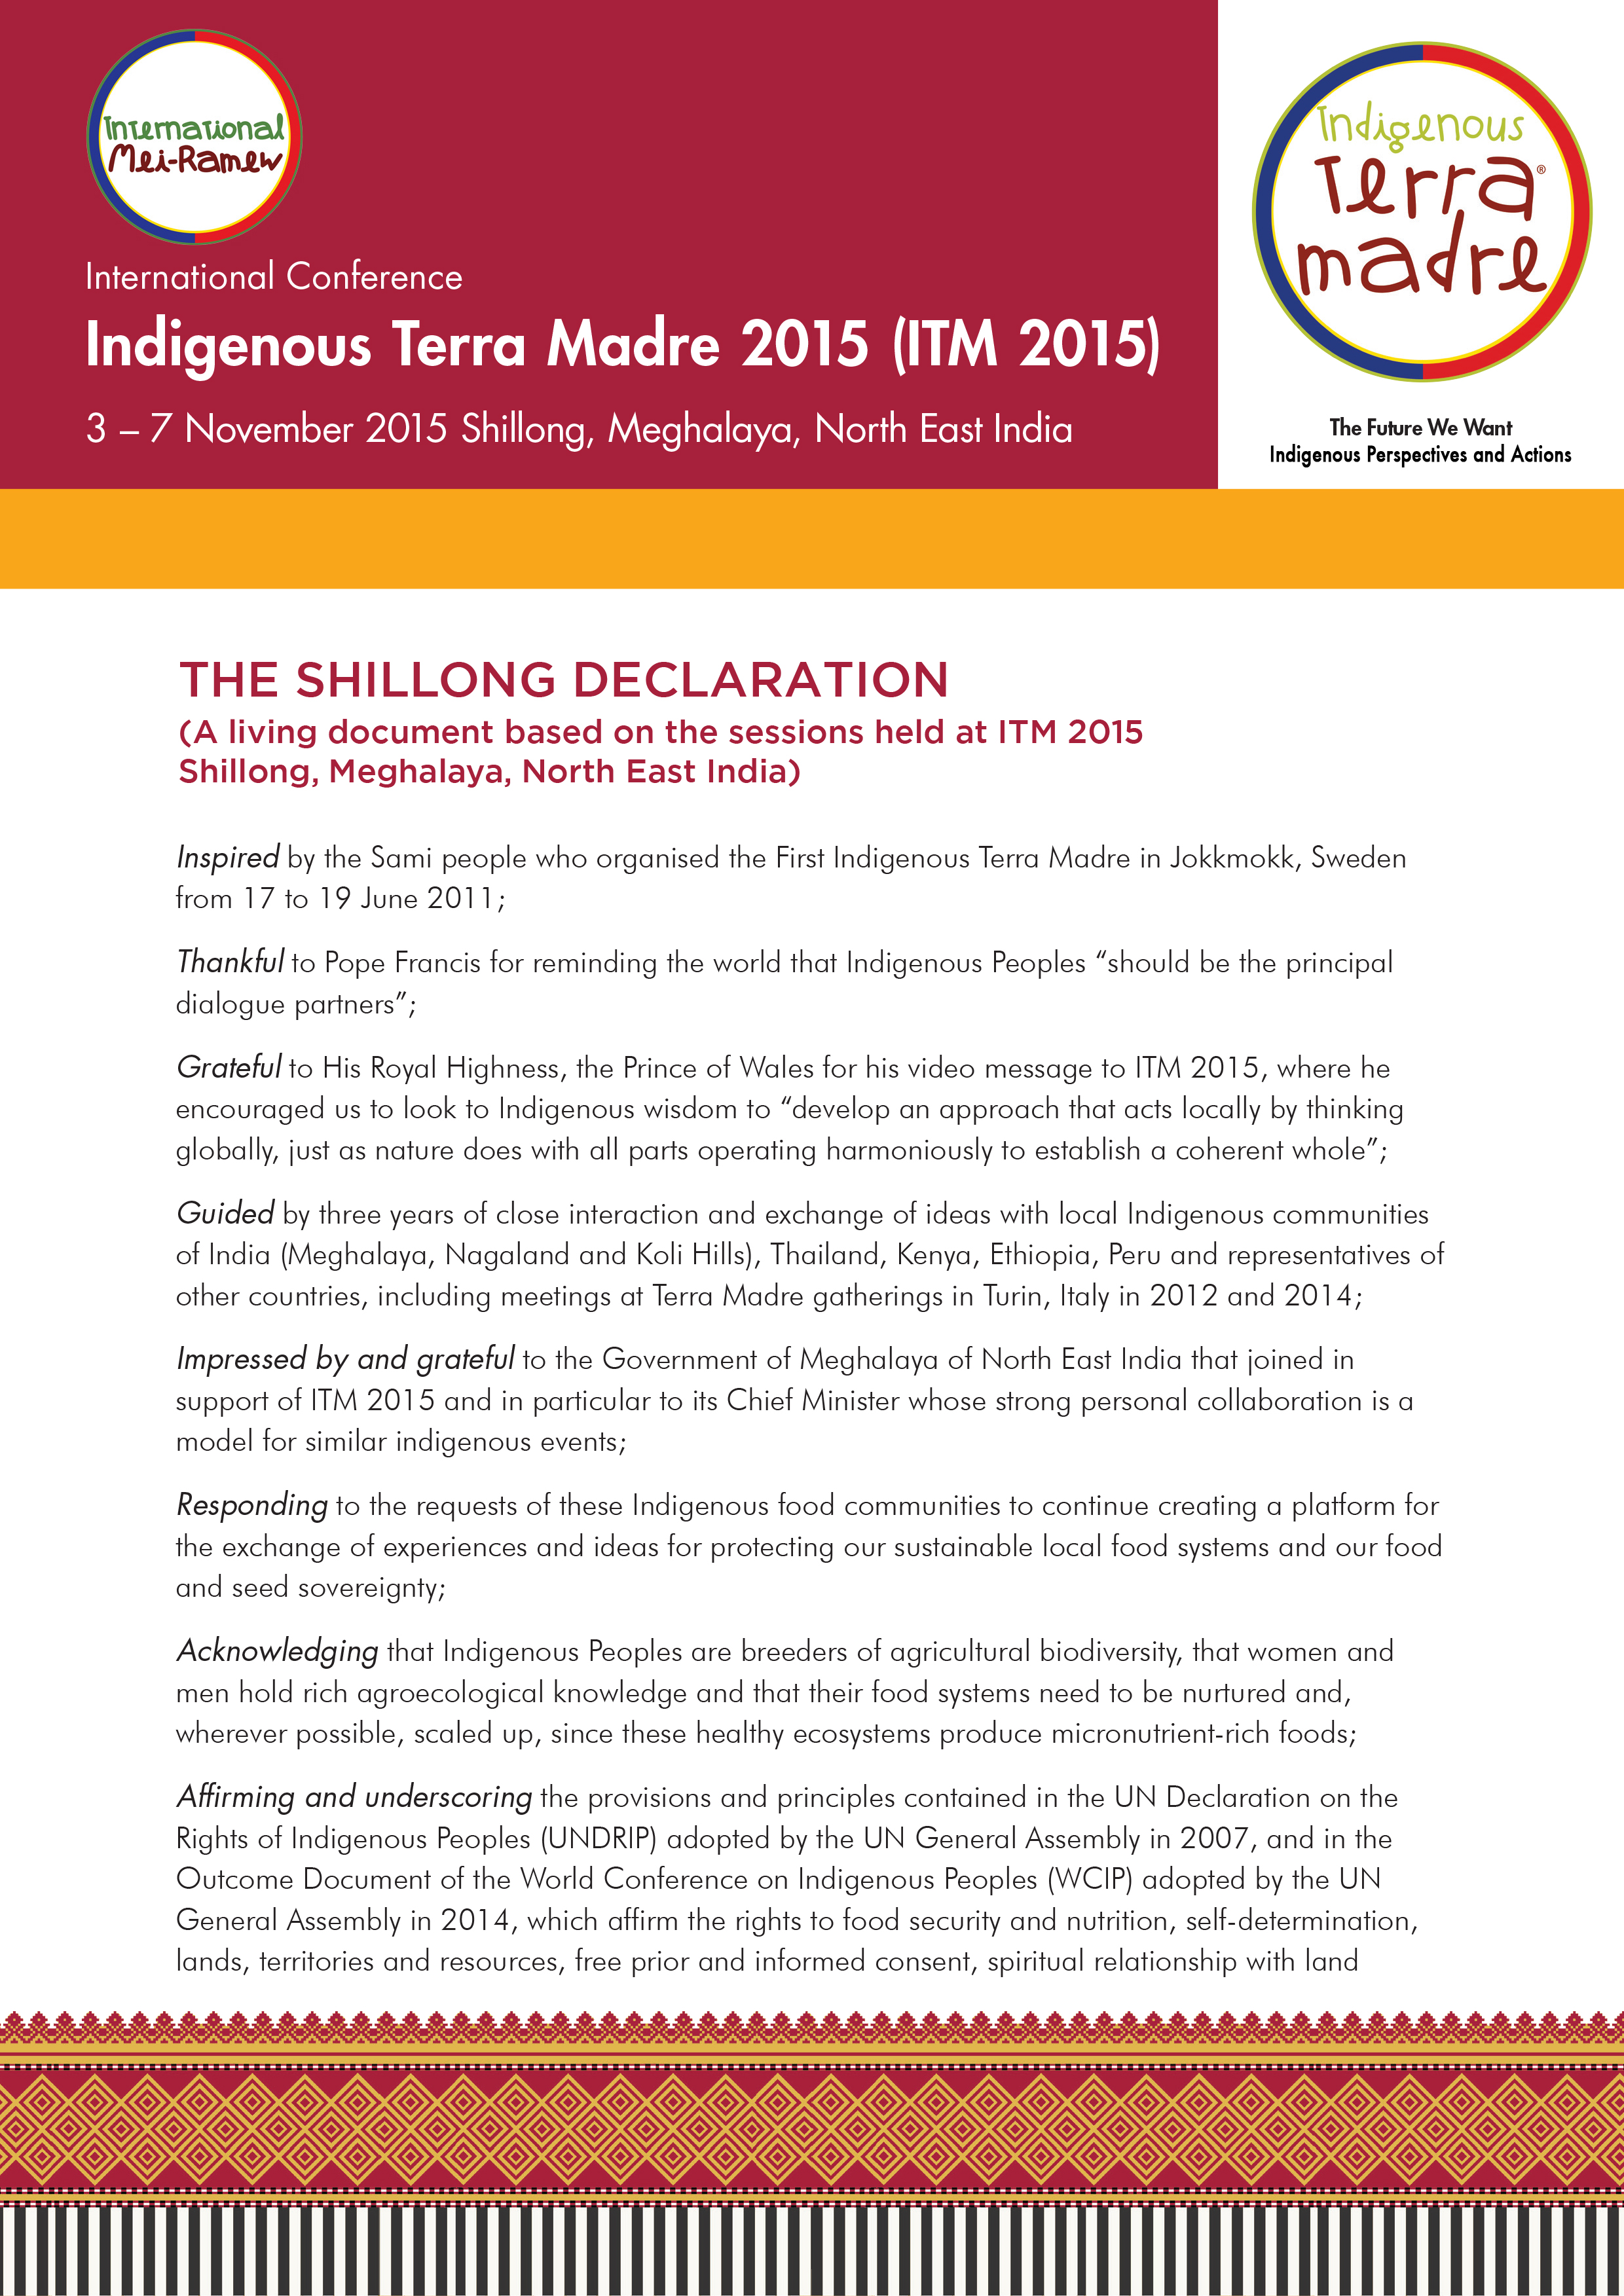 1 THE SHILLONG DECLARATION_English_7 March 2016-1